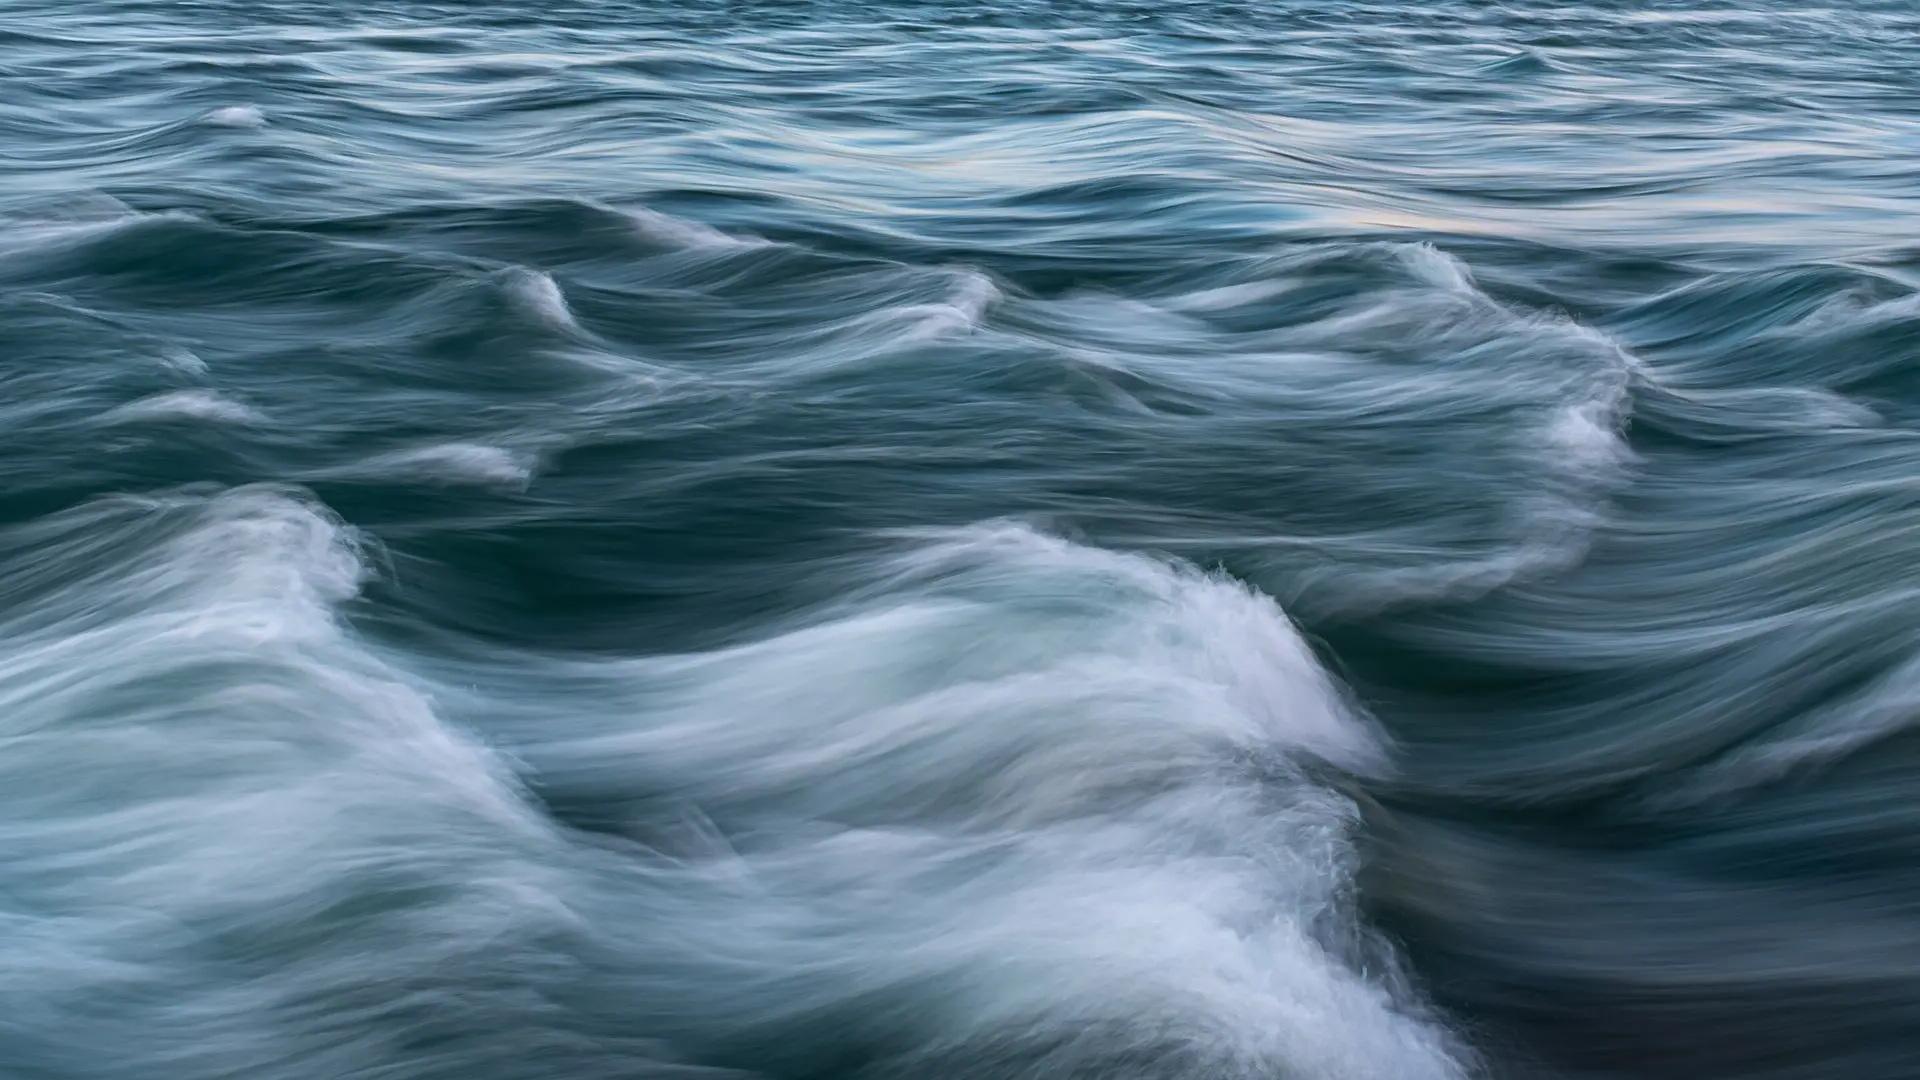 Ocean warming is causing changes in ocean currents that could intensify climate change effects, UMD researchers found. Photo by Adobe Stock.